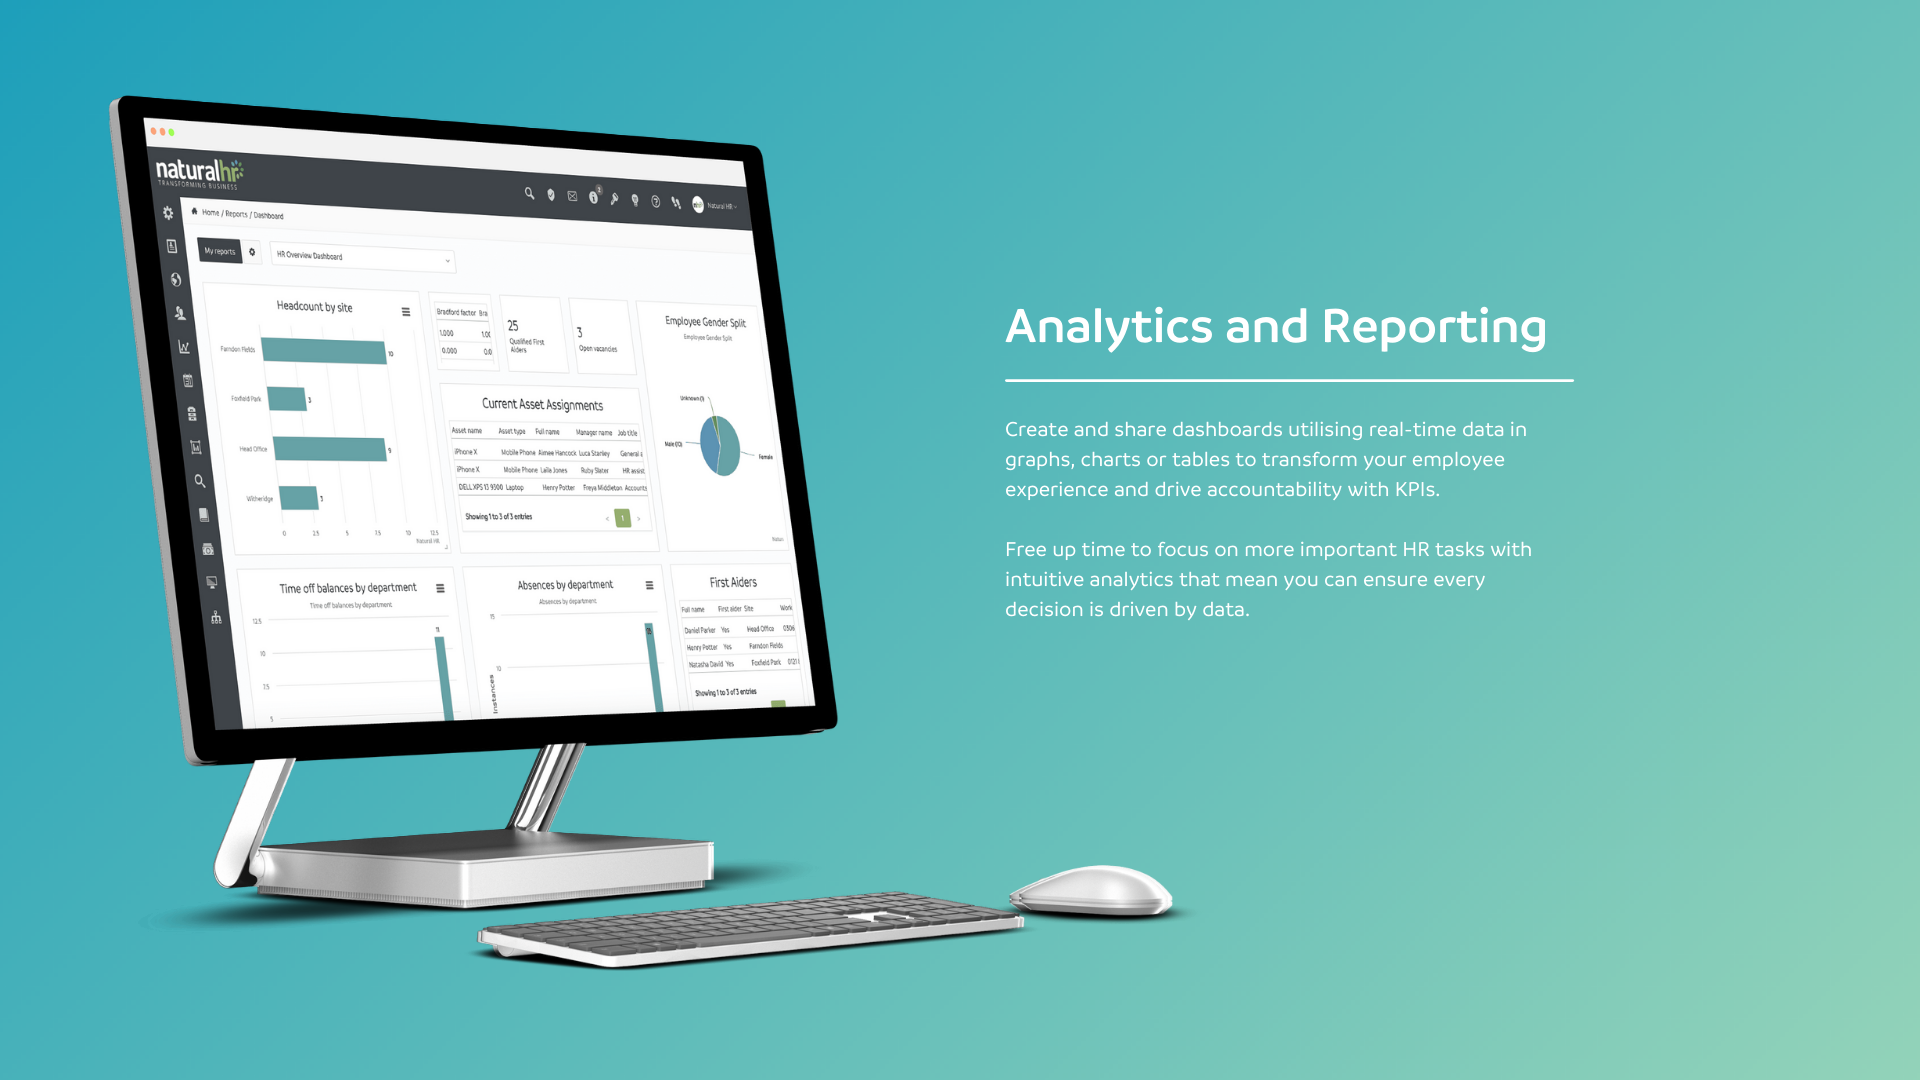 Create and share dashboards utilising real-time data in graphs, charts or tables to transform your employee experience and drive accountability with KPIs.